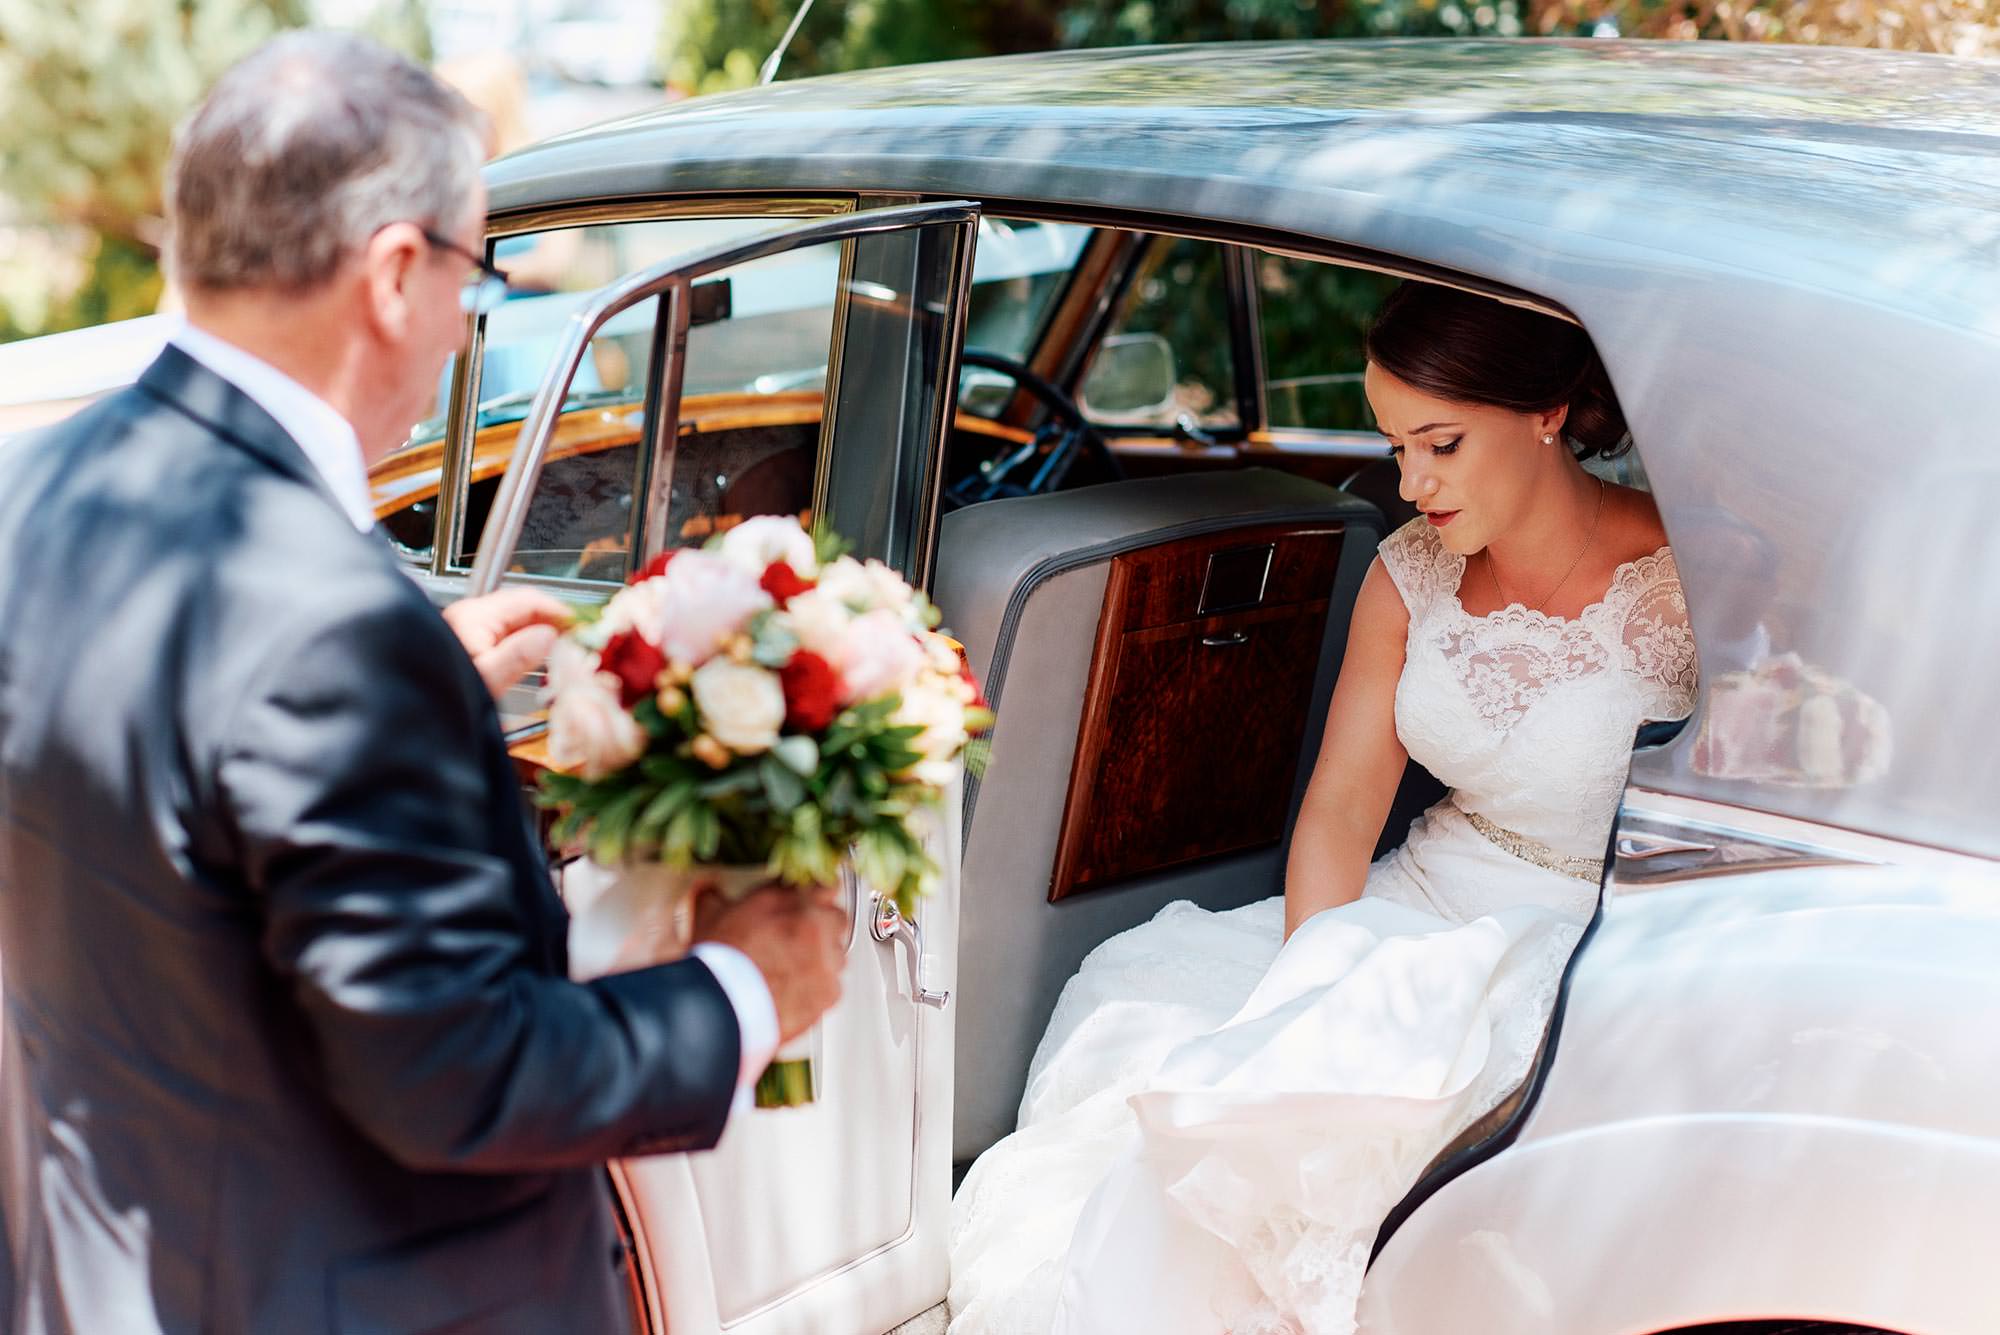 Bride alighting from the wedding car for her wedding ceremony